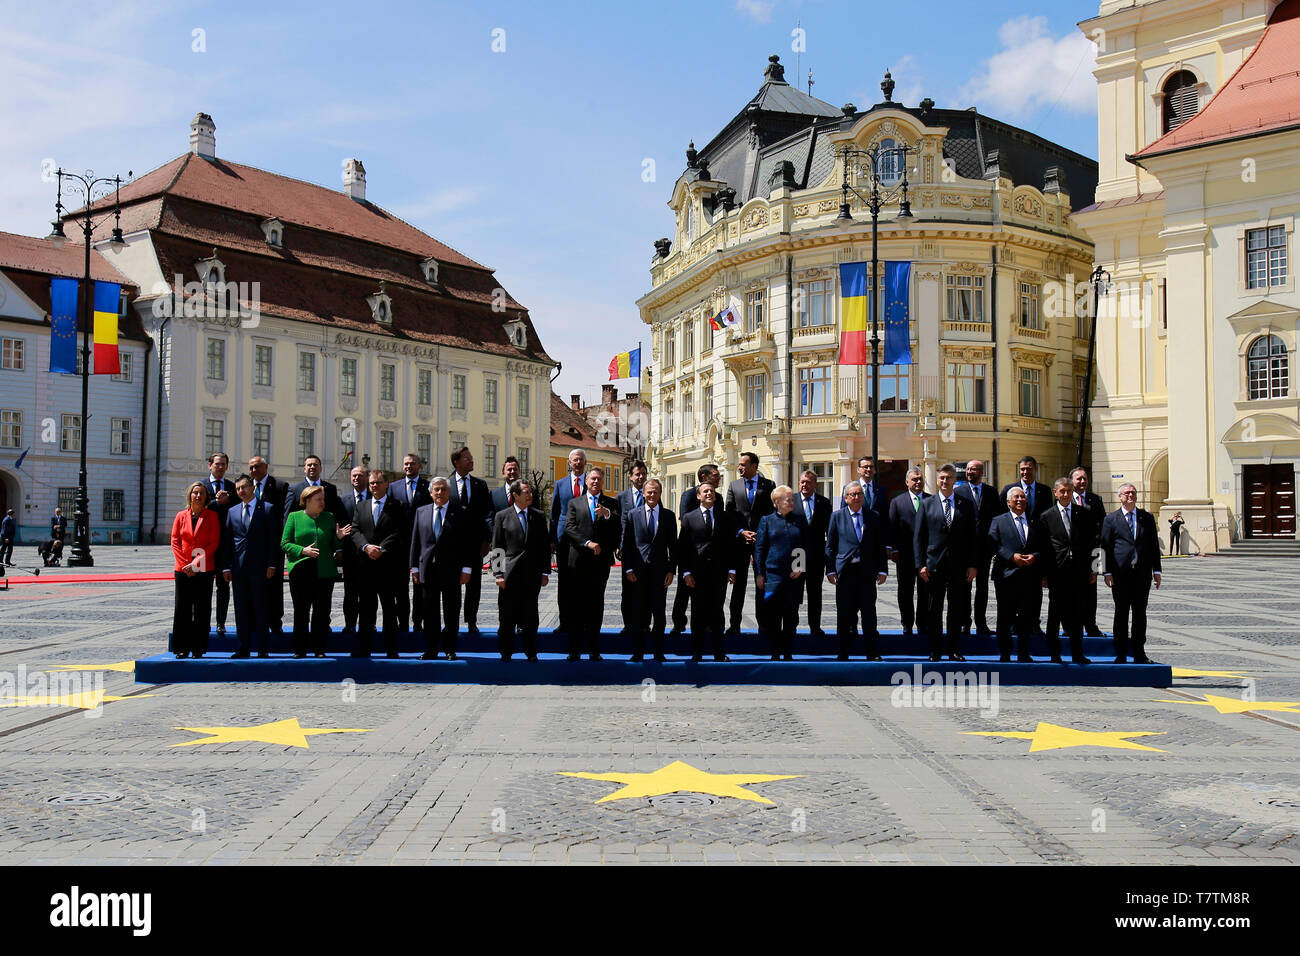 Sibiu, Romania. 9th May, 2019. Leaders pose for group photos during an European Union (EU) informal summit in Sibiu, Romania, on May 9, 2019. The leaders of the EU member states on Thursday agreed on defending 'one Europe' and upholding the rules-based international order in their '10 commitments' declaration, made at an informal summit in Sibiu, central Romania. Credit: Cristian Cristel/Xinhua/Alamy Live News Stock Photo